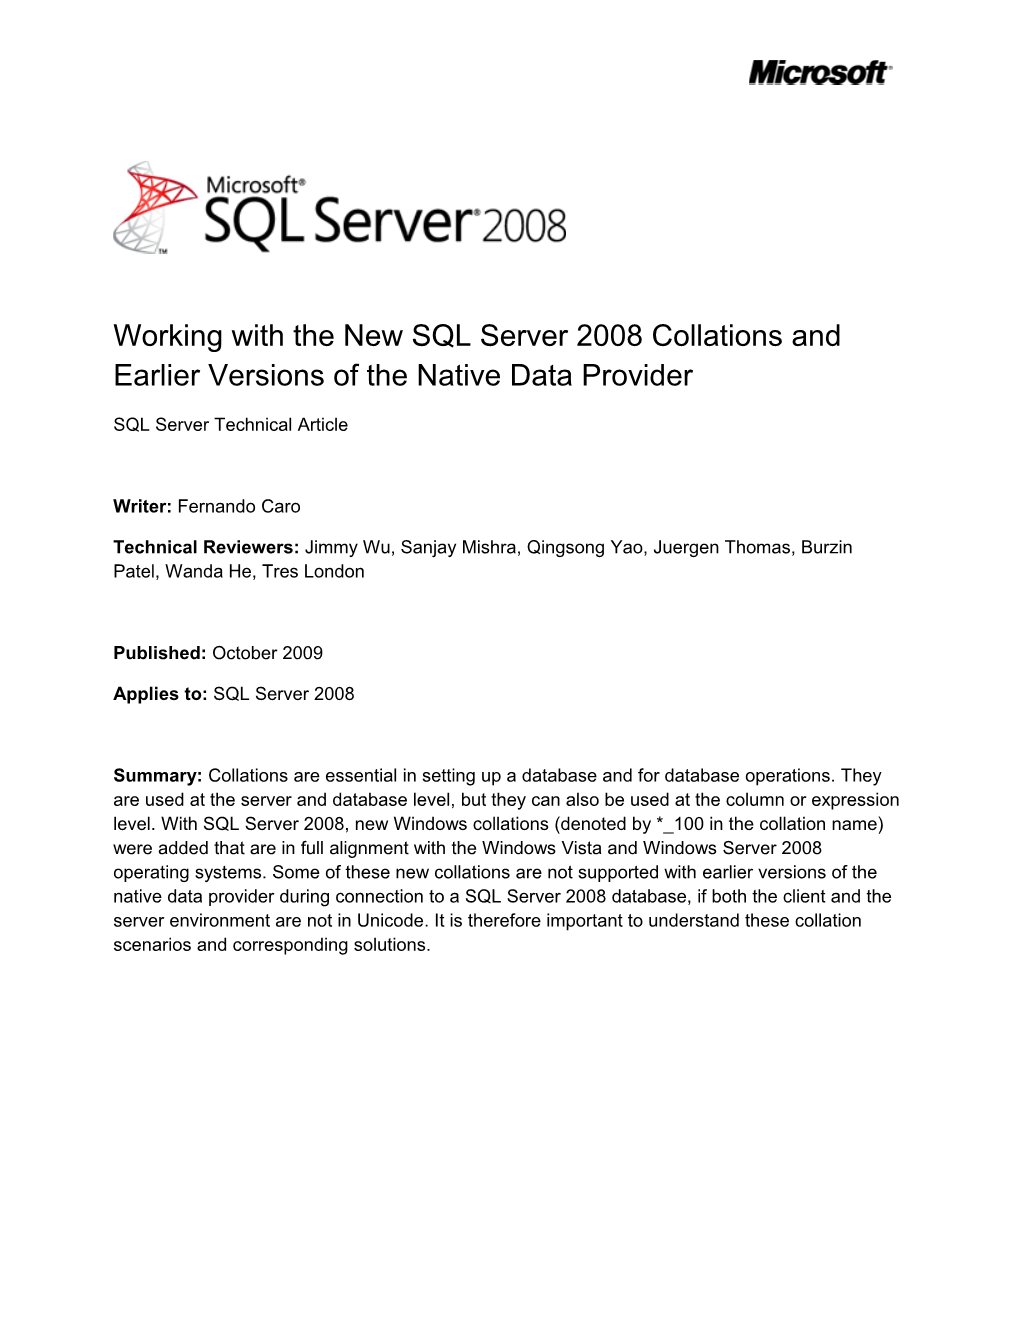 Working with the New SQL Server 2008 Collations and Earlier Versions of the Native Data Provider